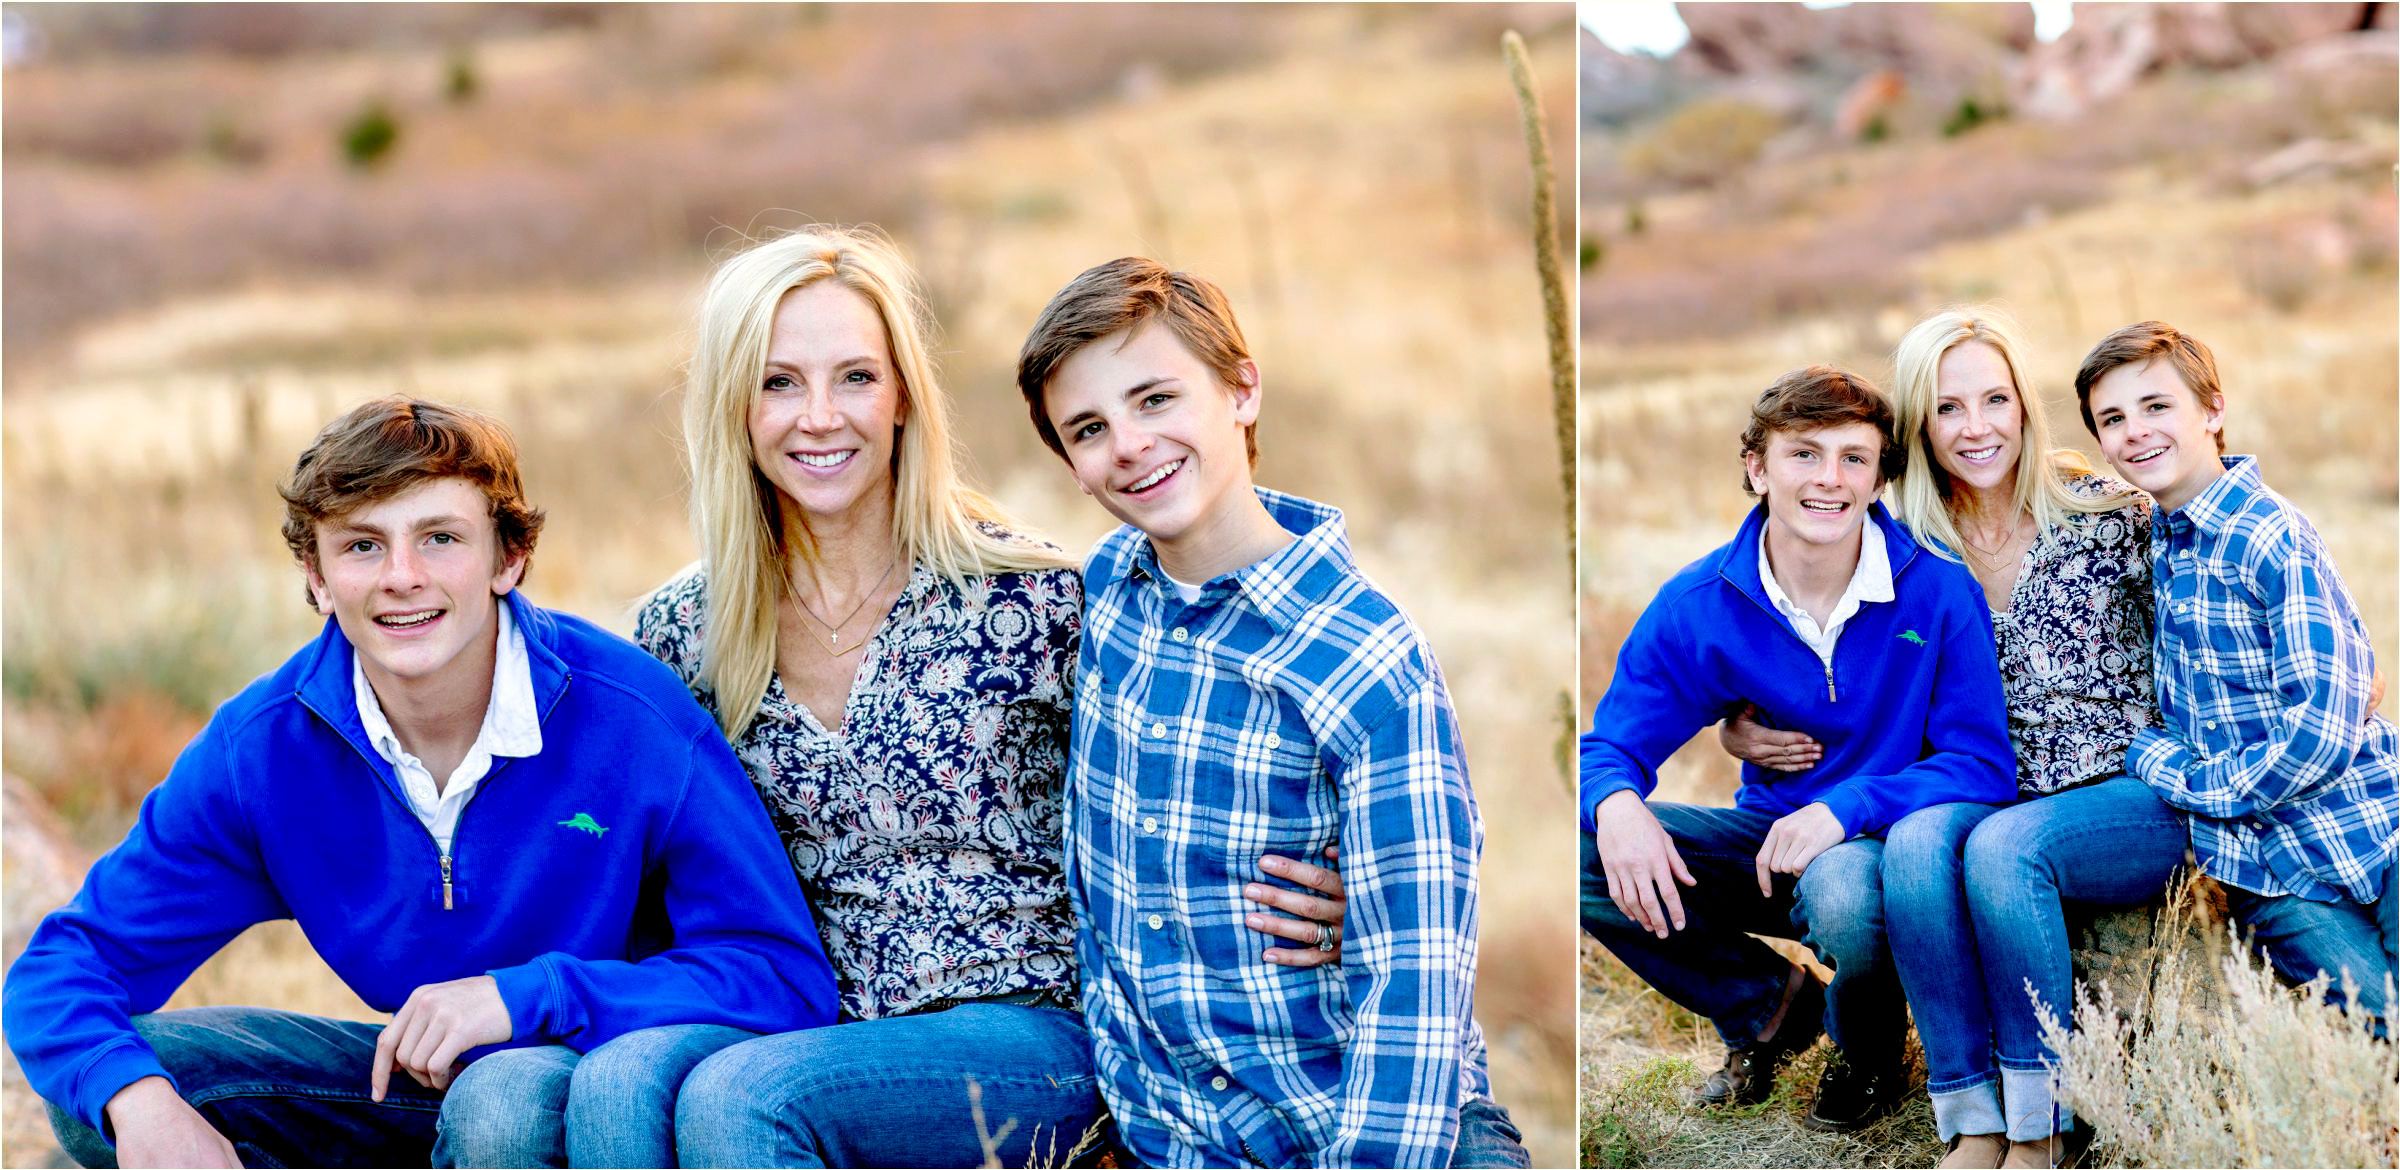 mother-and-her-sons-pose-in-the-wilds-of-red-rocks-during-photo-shoot-006